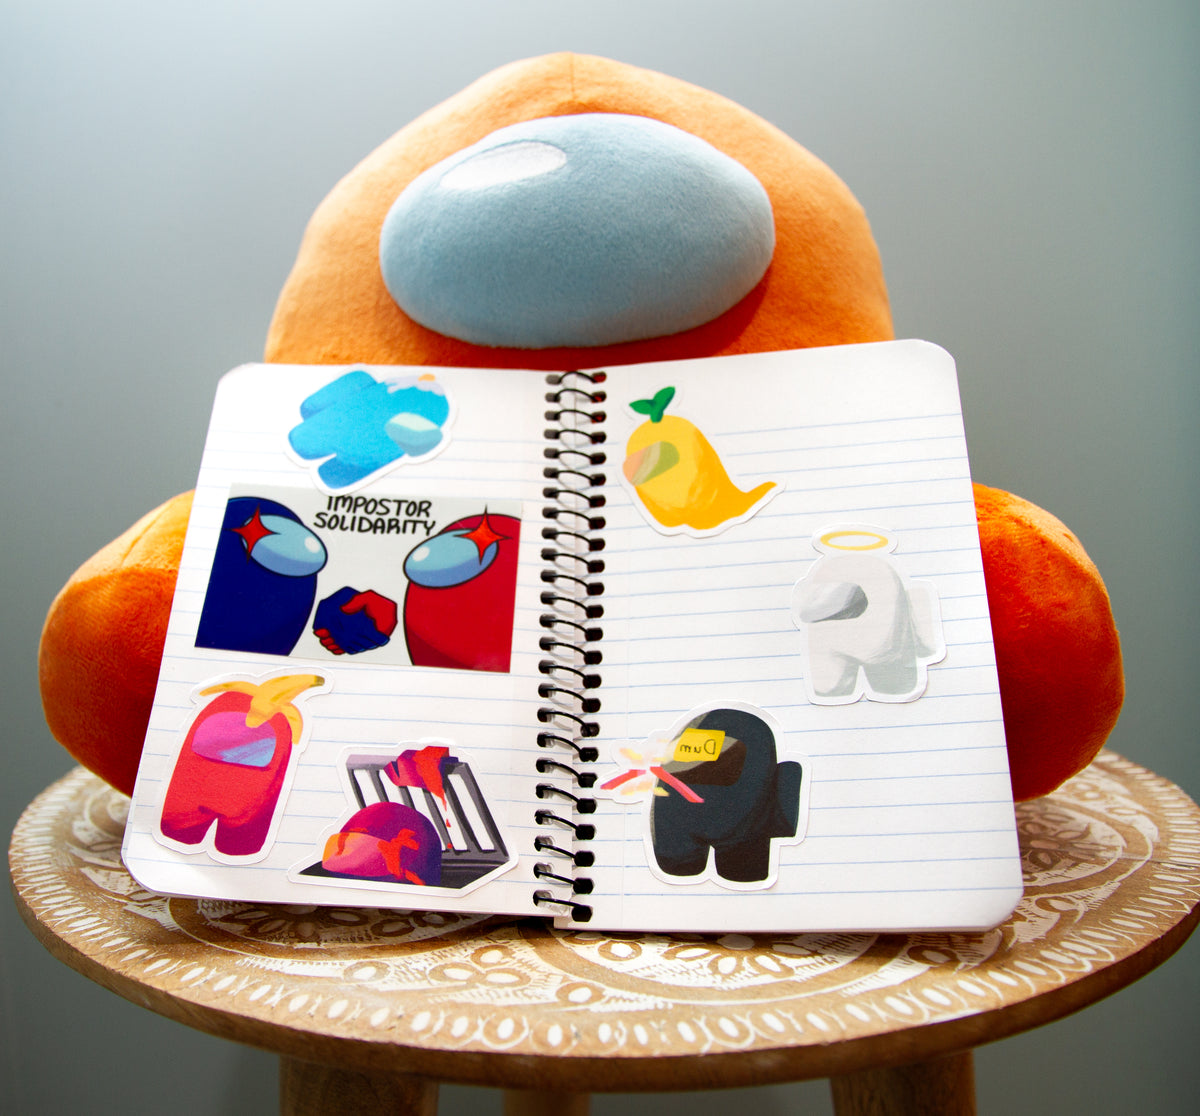 The notebook of Among Us stickers, six by Kuuji and one random, propped up against a sitting crewmate plush.